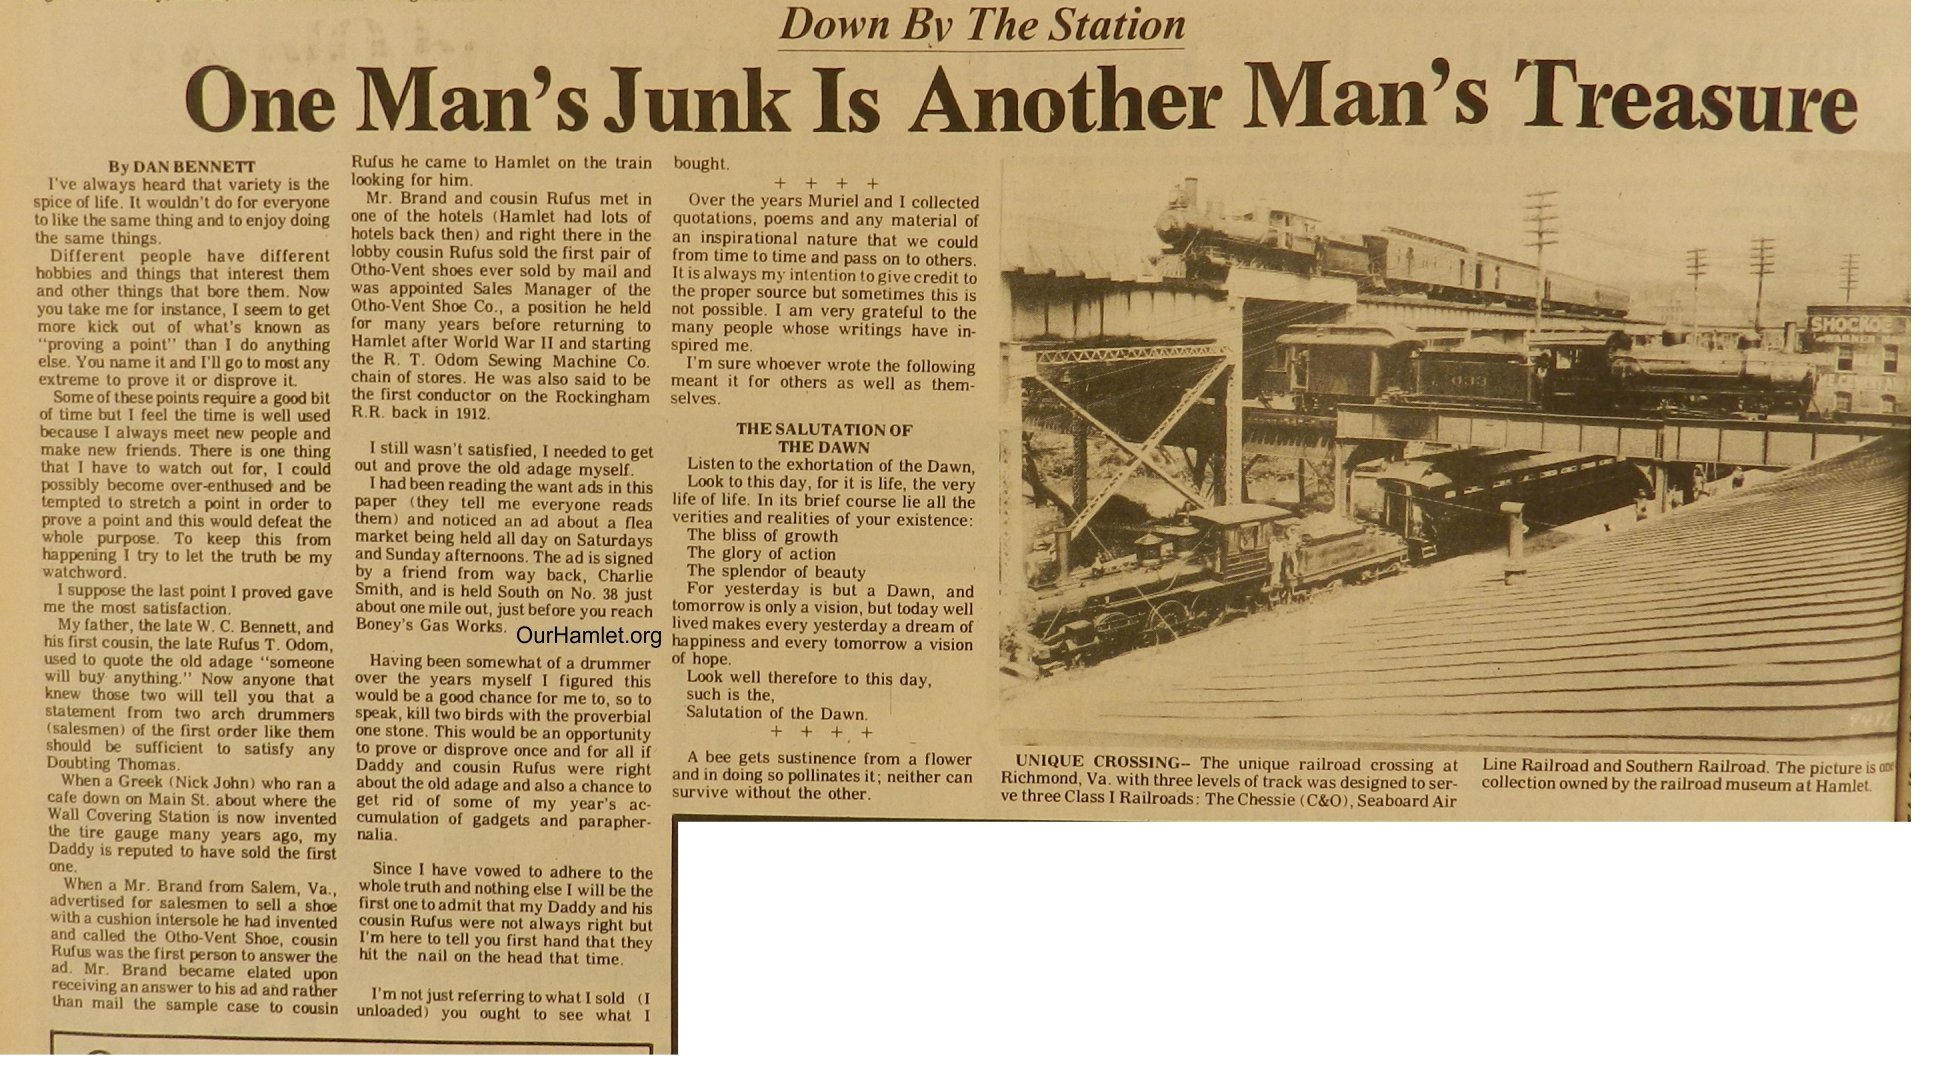 Down by the Station - One Mans Junk OH.jpg